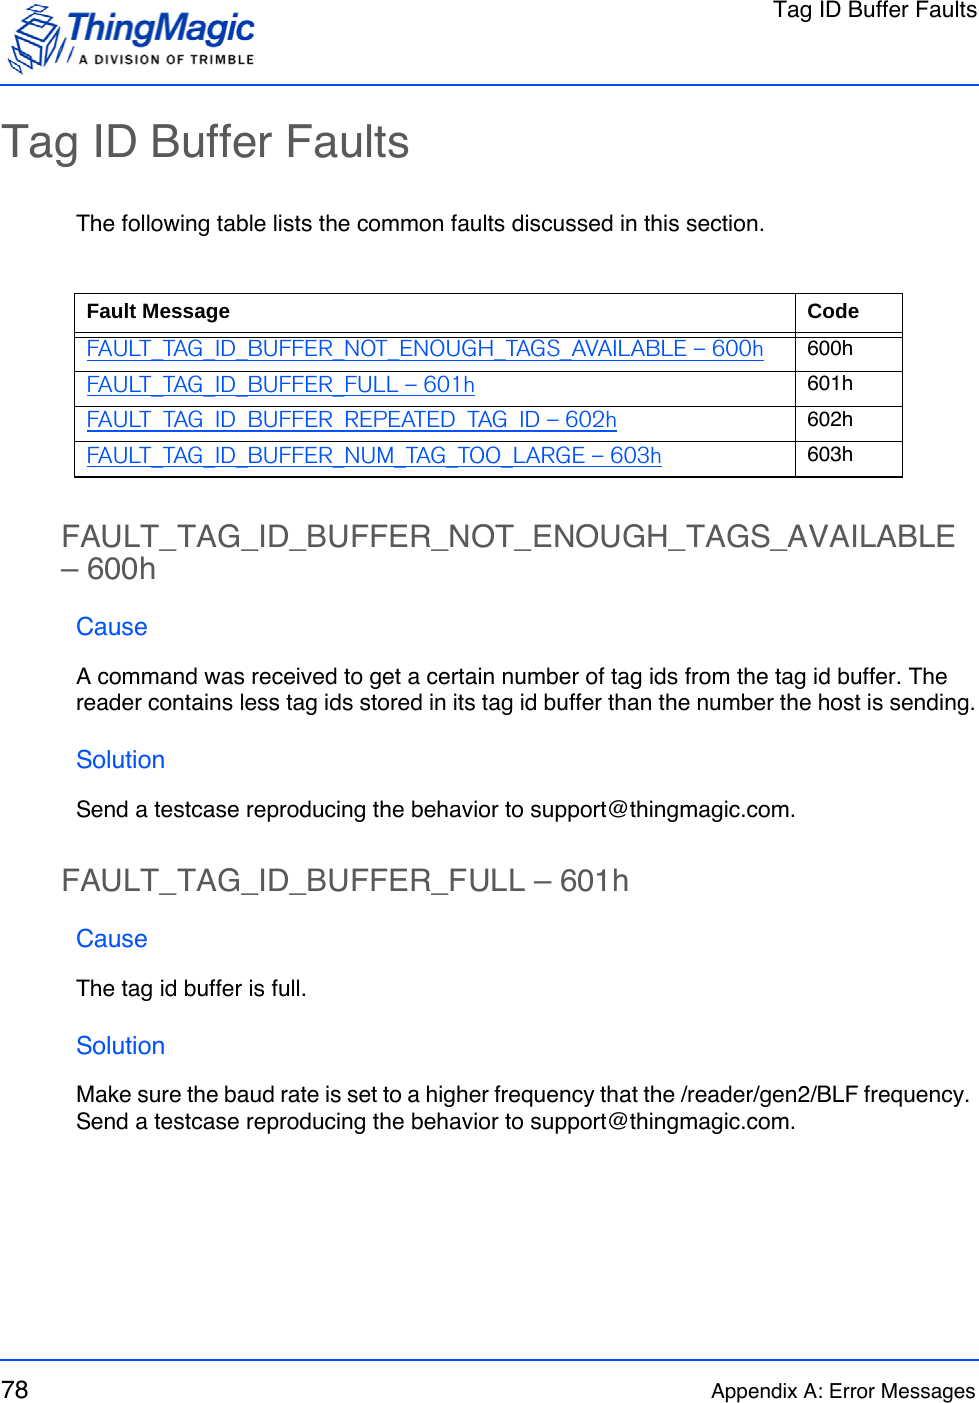 Tag ID Buffer Faults78 Appendix A: Error MessagesTag ID Buffer FaultsThe following table lists the common faults discussed in this section.FAULT_TAG_ID_BUFFER_NOT_ENOUGH_TAGS_AVAILABLE – 600hCauseA command was received to get a certain number of tag ids from the tag id buffer. The reader contains less tag ids stored in its tag id buffer than the number the host is sending.SolutionSend a testcase reproducing the behavior to support@thingmagic.com.FAULT_TAG_ID_BUFFER_FULL – 601hCauseThe tag id buffer is full.SolutionMake sure the baud rate is set to a higher frequency that the /reader/gen2/BLF frequency. Send a testcase reproducing the behavior to support@thingmagic.com.Fault Message CodeFAULT_TAG_ID_BUFFER_NOT_ENOUGH_TAGS_AVAILABLE – 600h 600hFAULT_TAG_ID_BUFFER_FULL – 601h 601hFAULT_TAG_ID_BUFFER_REPEATED_TAG_ID – 602h 602hFAULT_TAG_ID_BUFFER_NUM_TAG_TOO_LARGE – 603h 603h